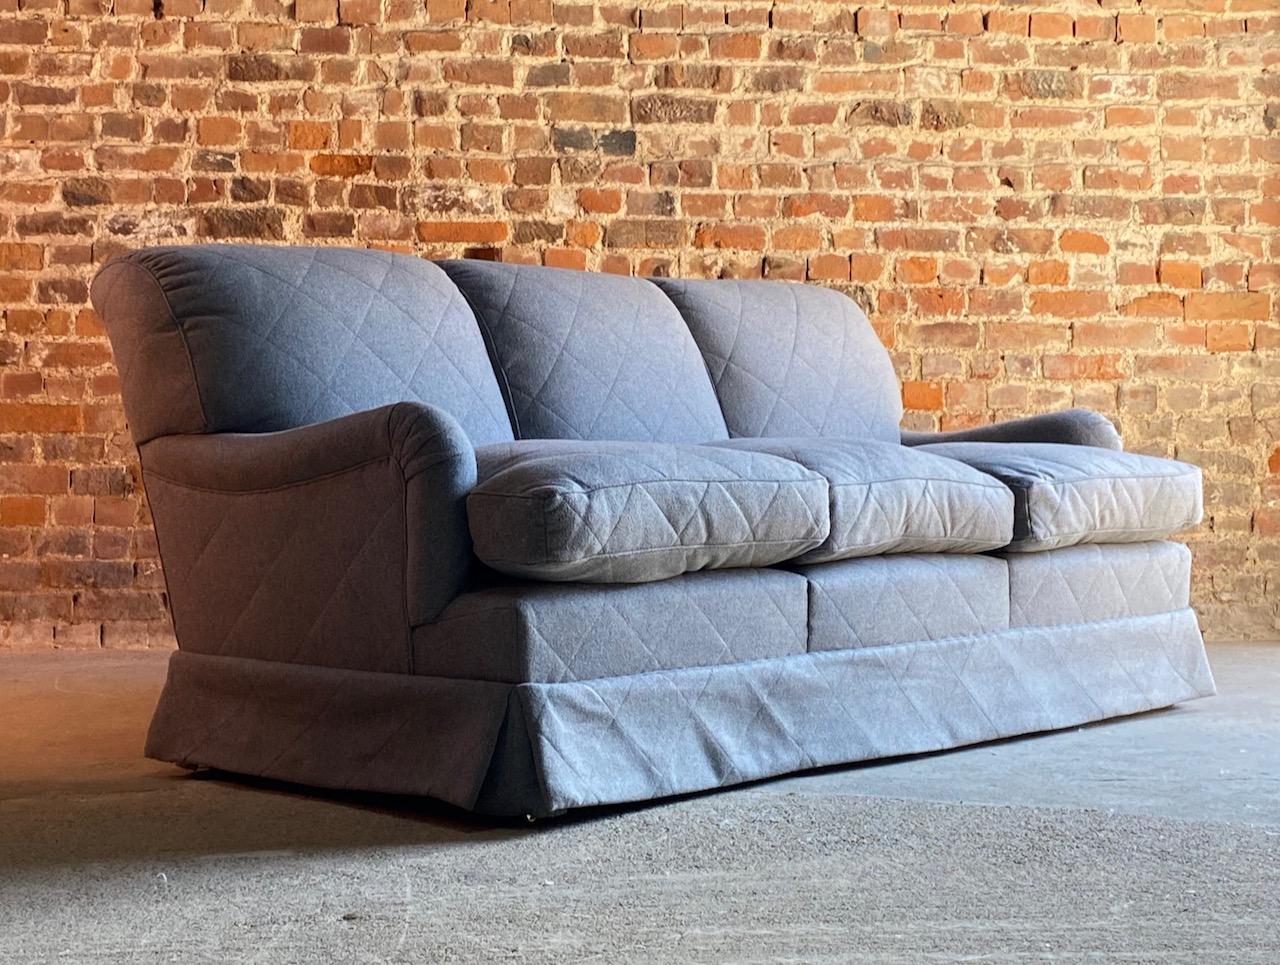 Howard & Sons Bridgewater sofa deep seated loose cushion bespoke 2014 number 2

Howard & Sons loose cushion deep seated Bridgewater sofa labelled to underside, the sofa is upholstered in the finest grey 100% wool upholstery, H&S Serial number